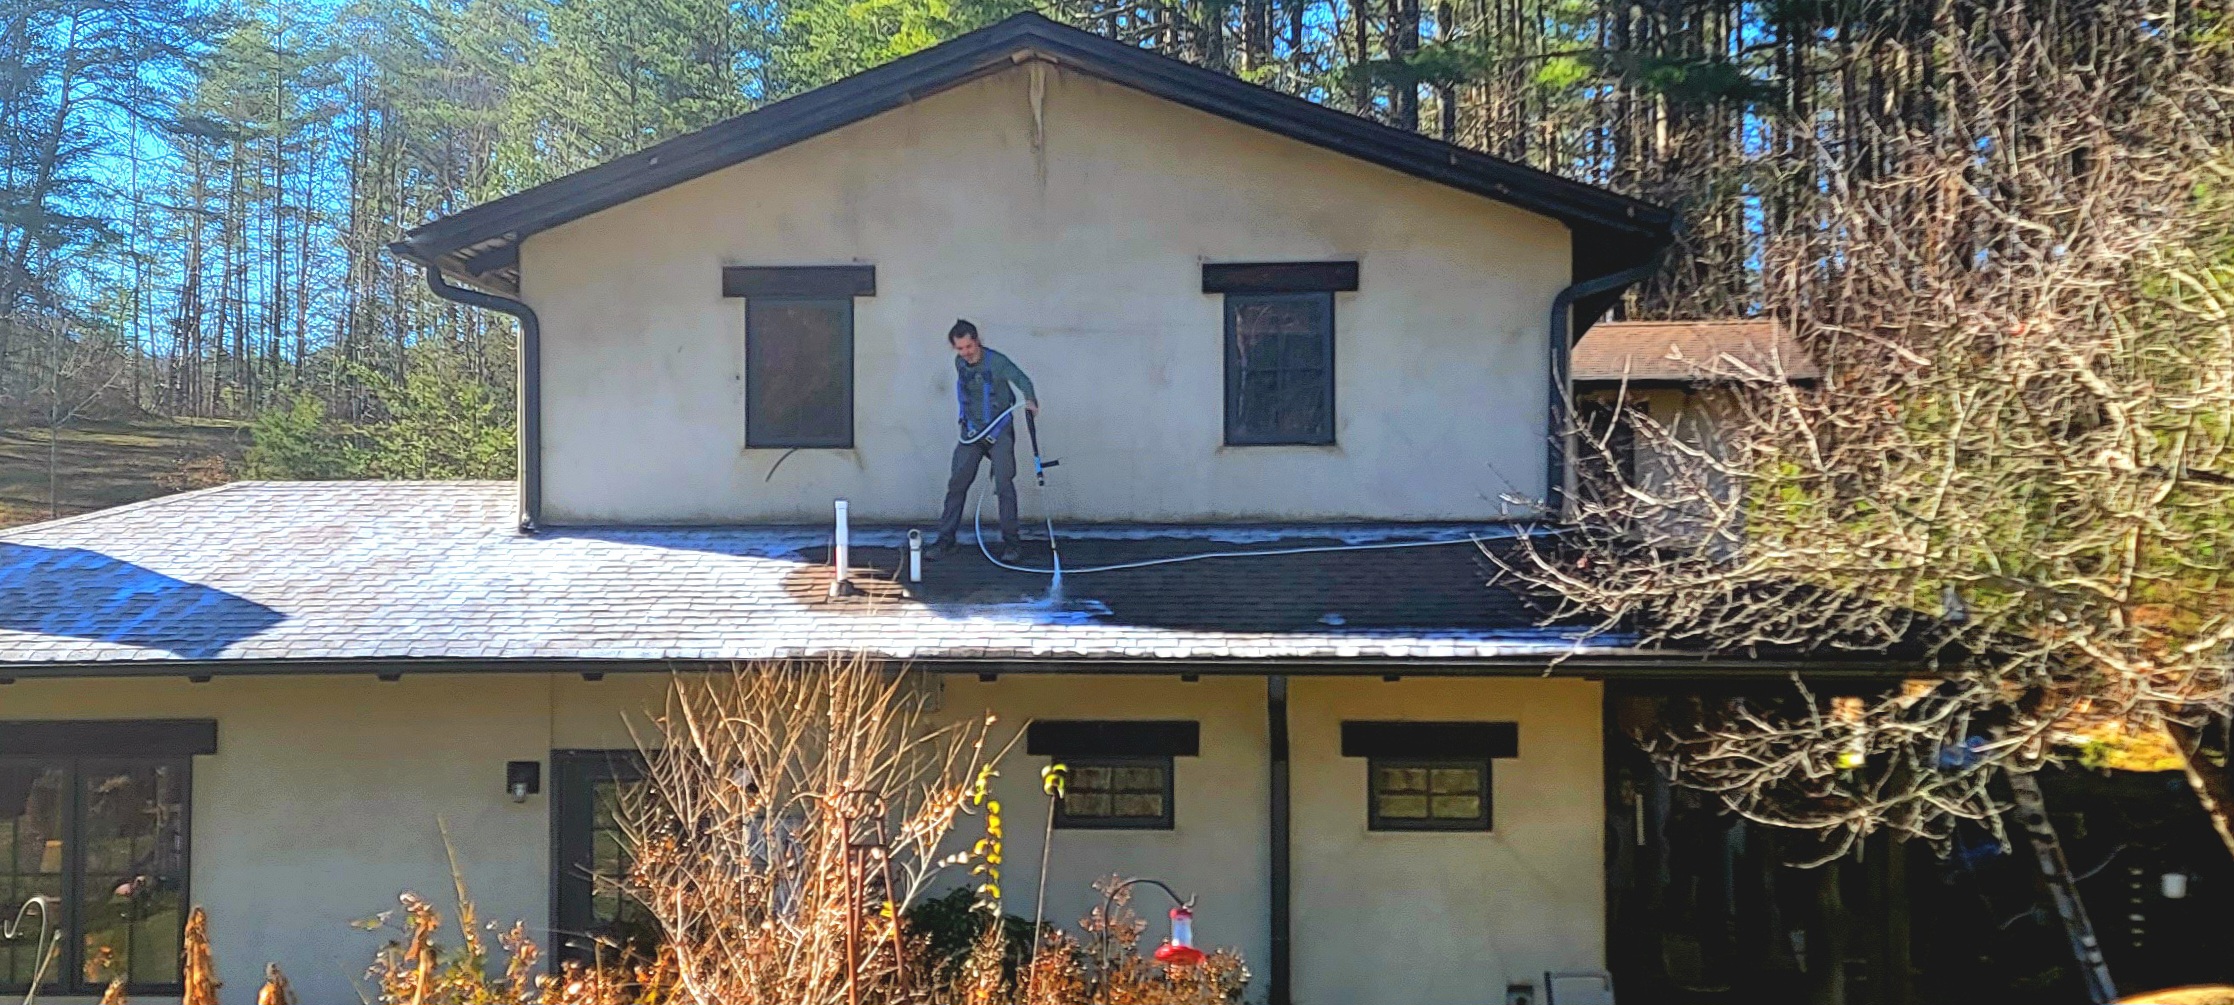 man on roof for rural home. spraying roof restoration solution. two story house in the forest of wnc